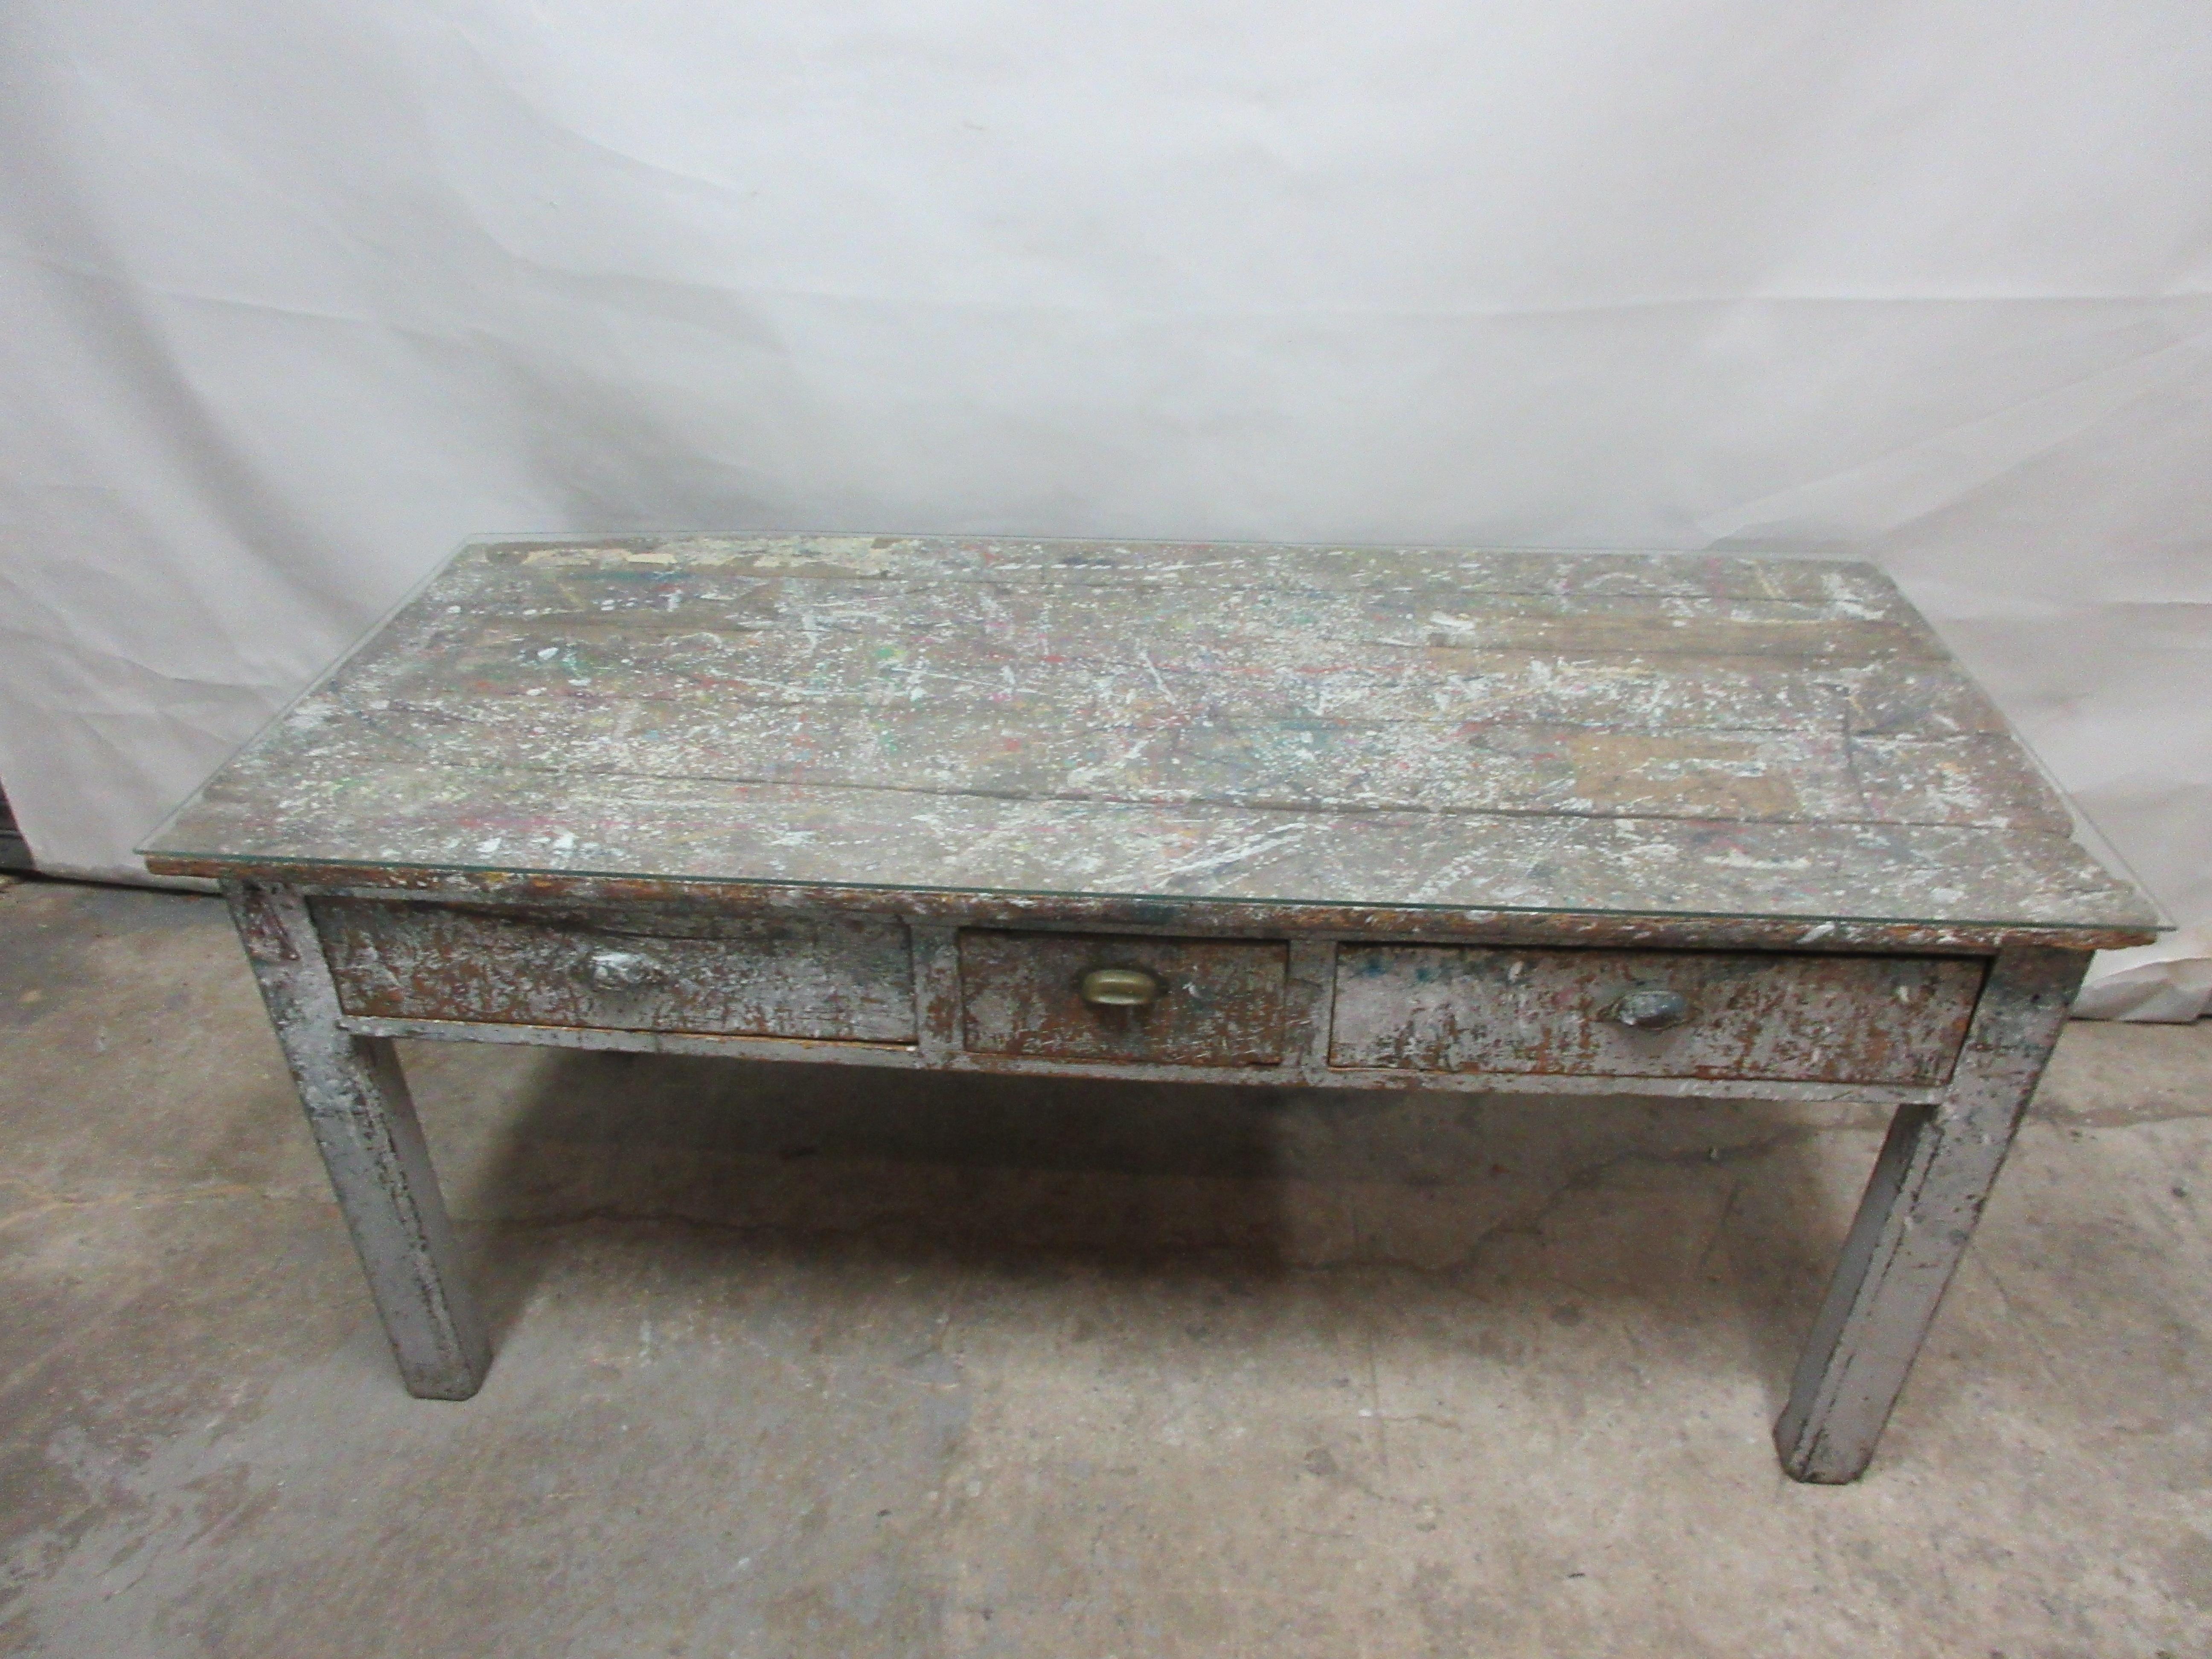 This is an antique work shop paint table with 3 drawers. It has a glass top.